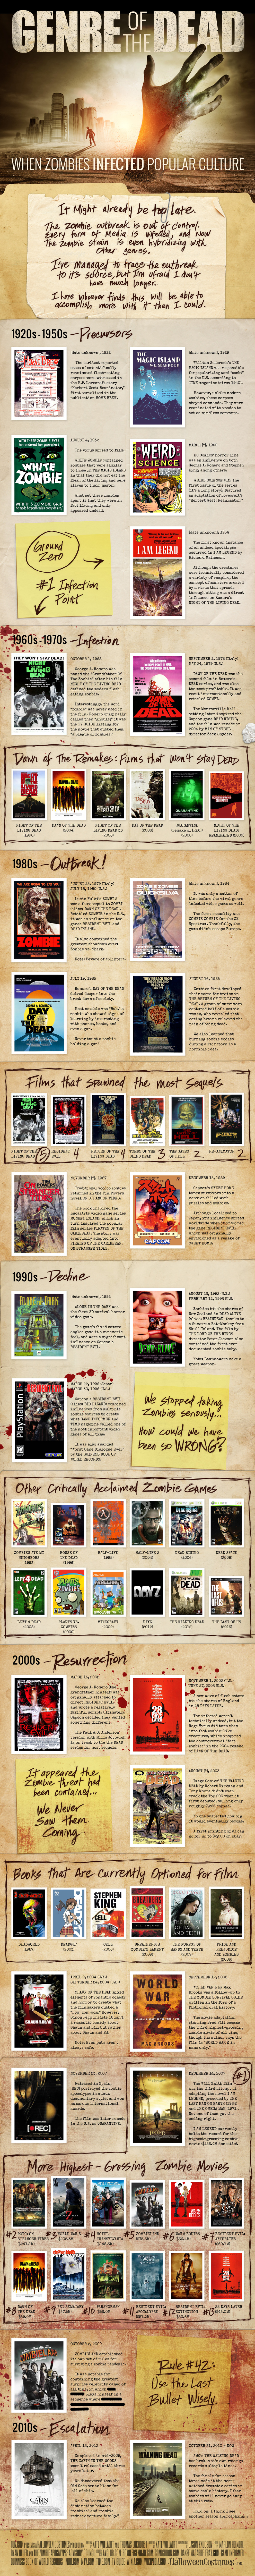 Genre of the Dead: Zombies Infographic